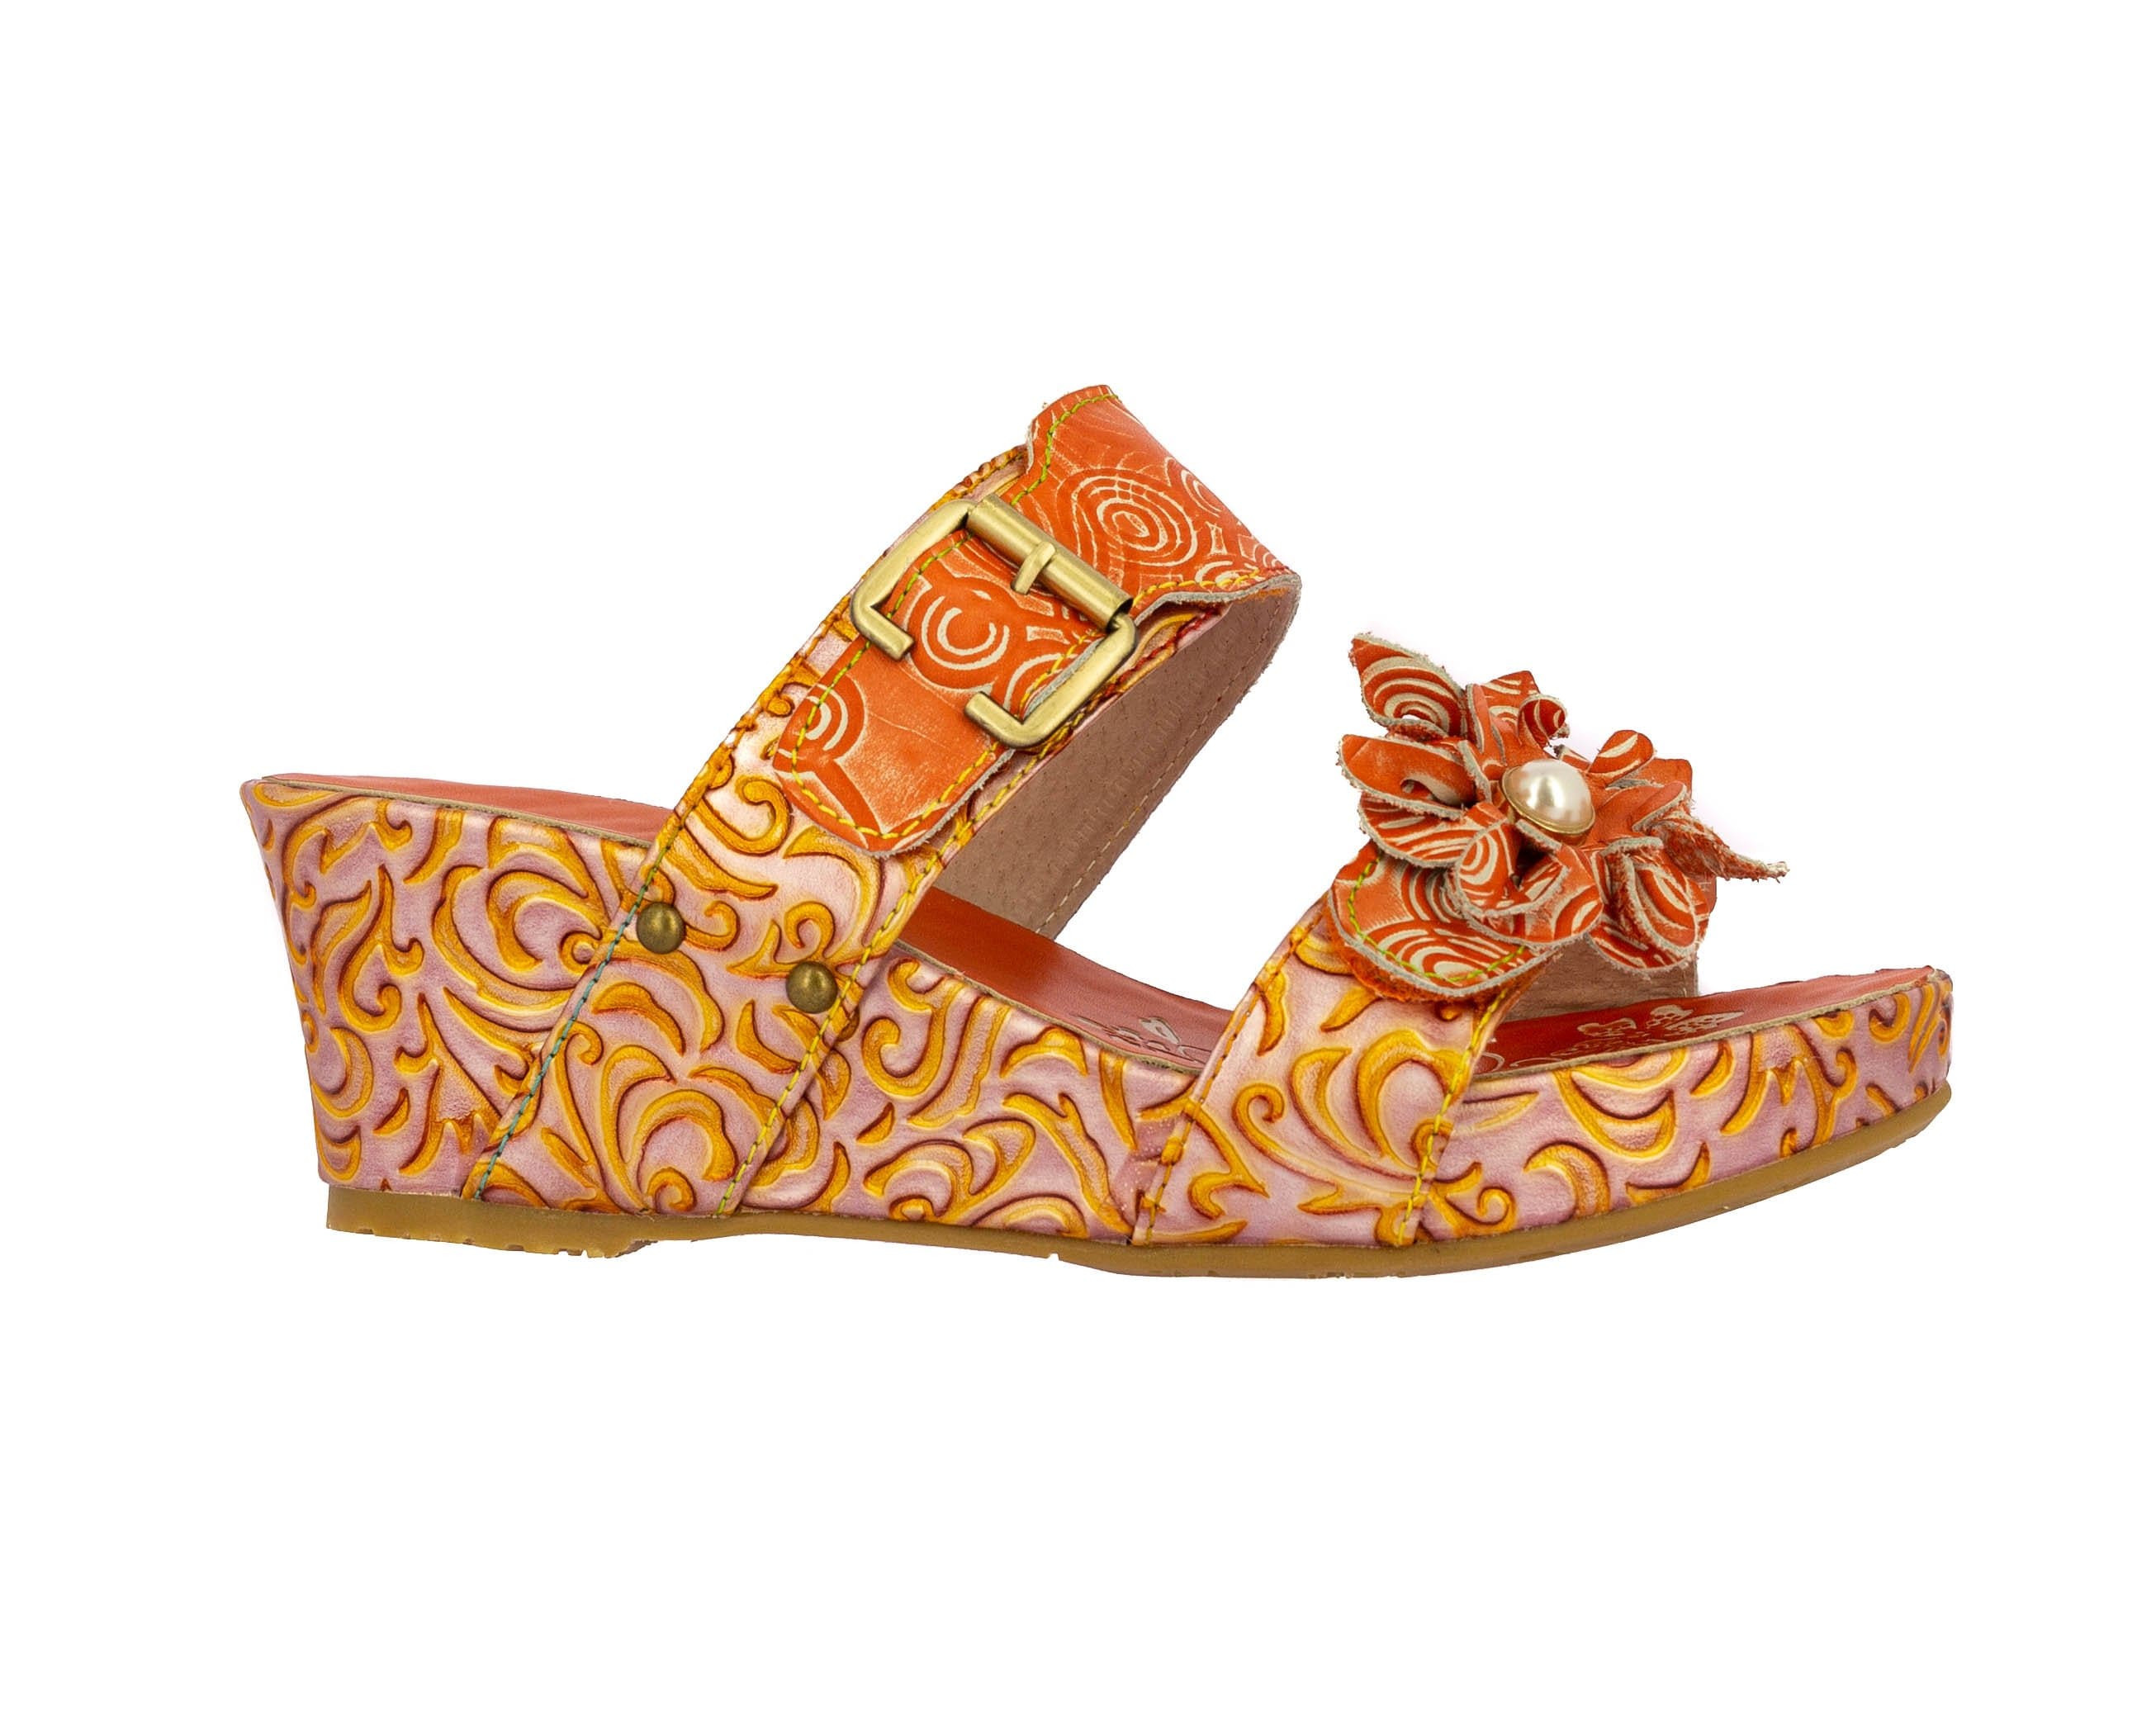 FACDIAO 21 Shoes - 35 / ORANGE - Mulle